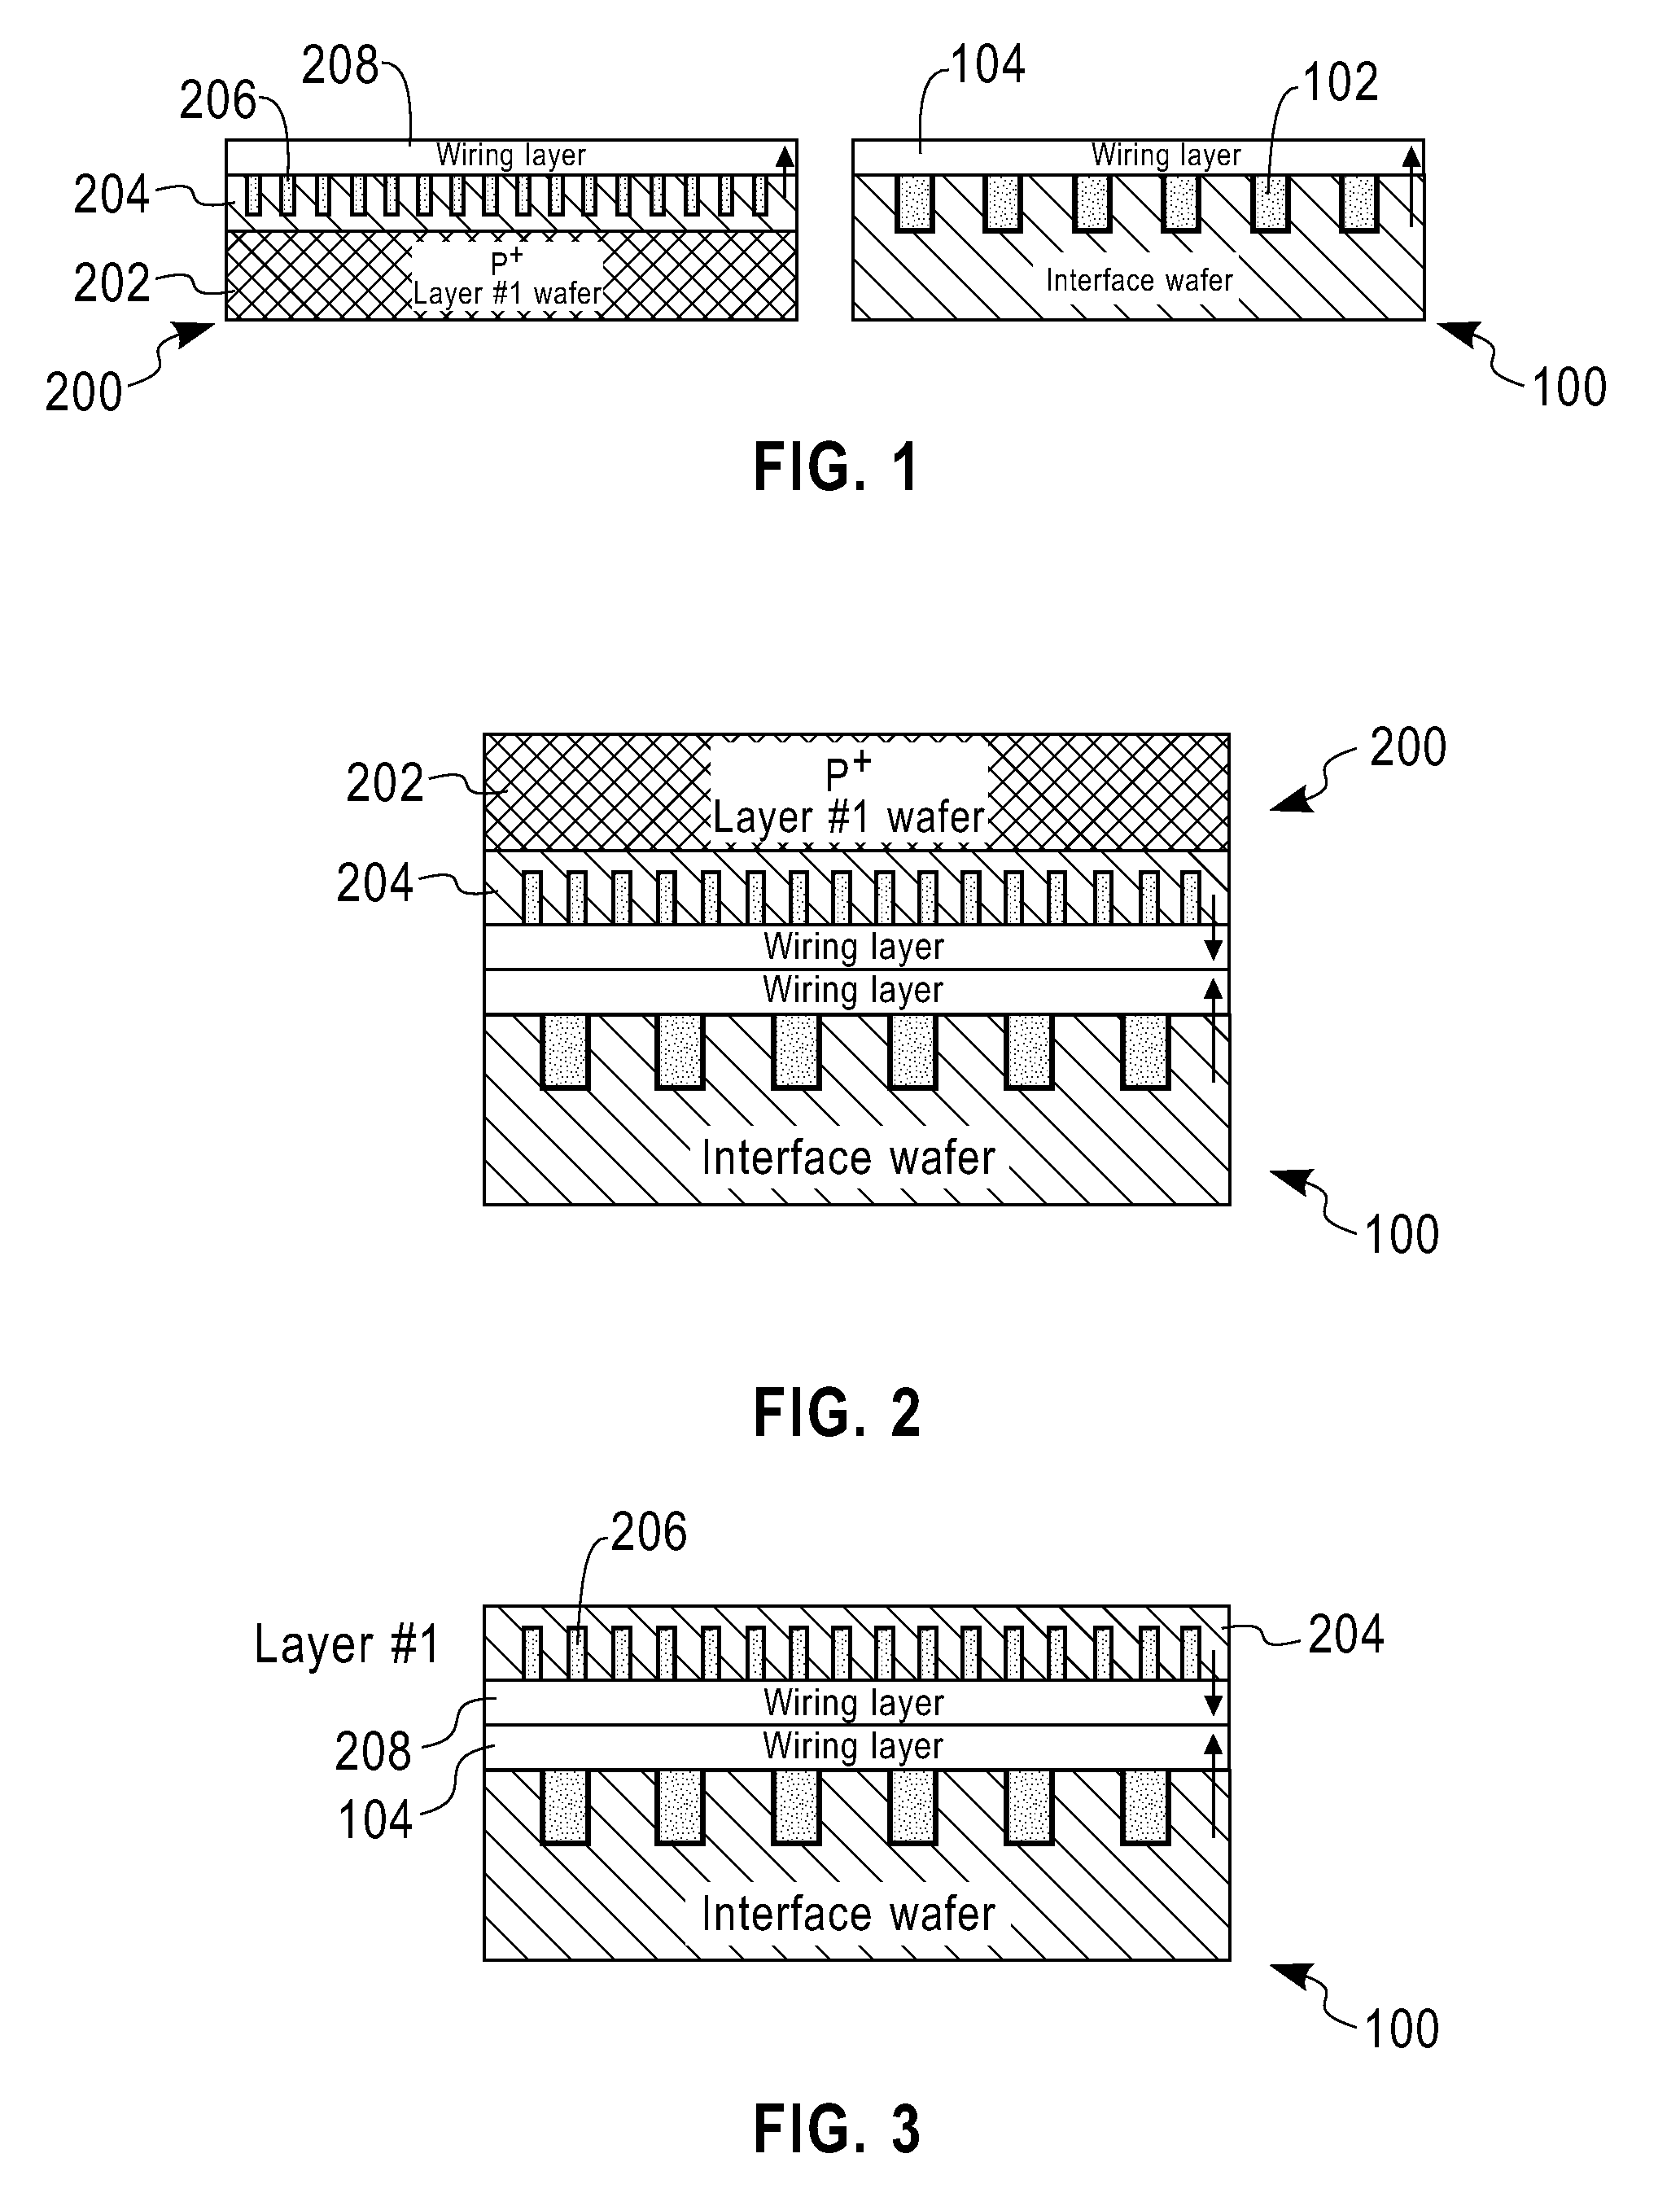 3D integrated circuit device fabrication using interface wafer as permanent carrier